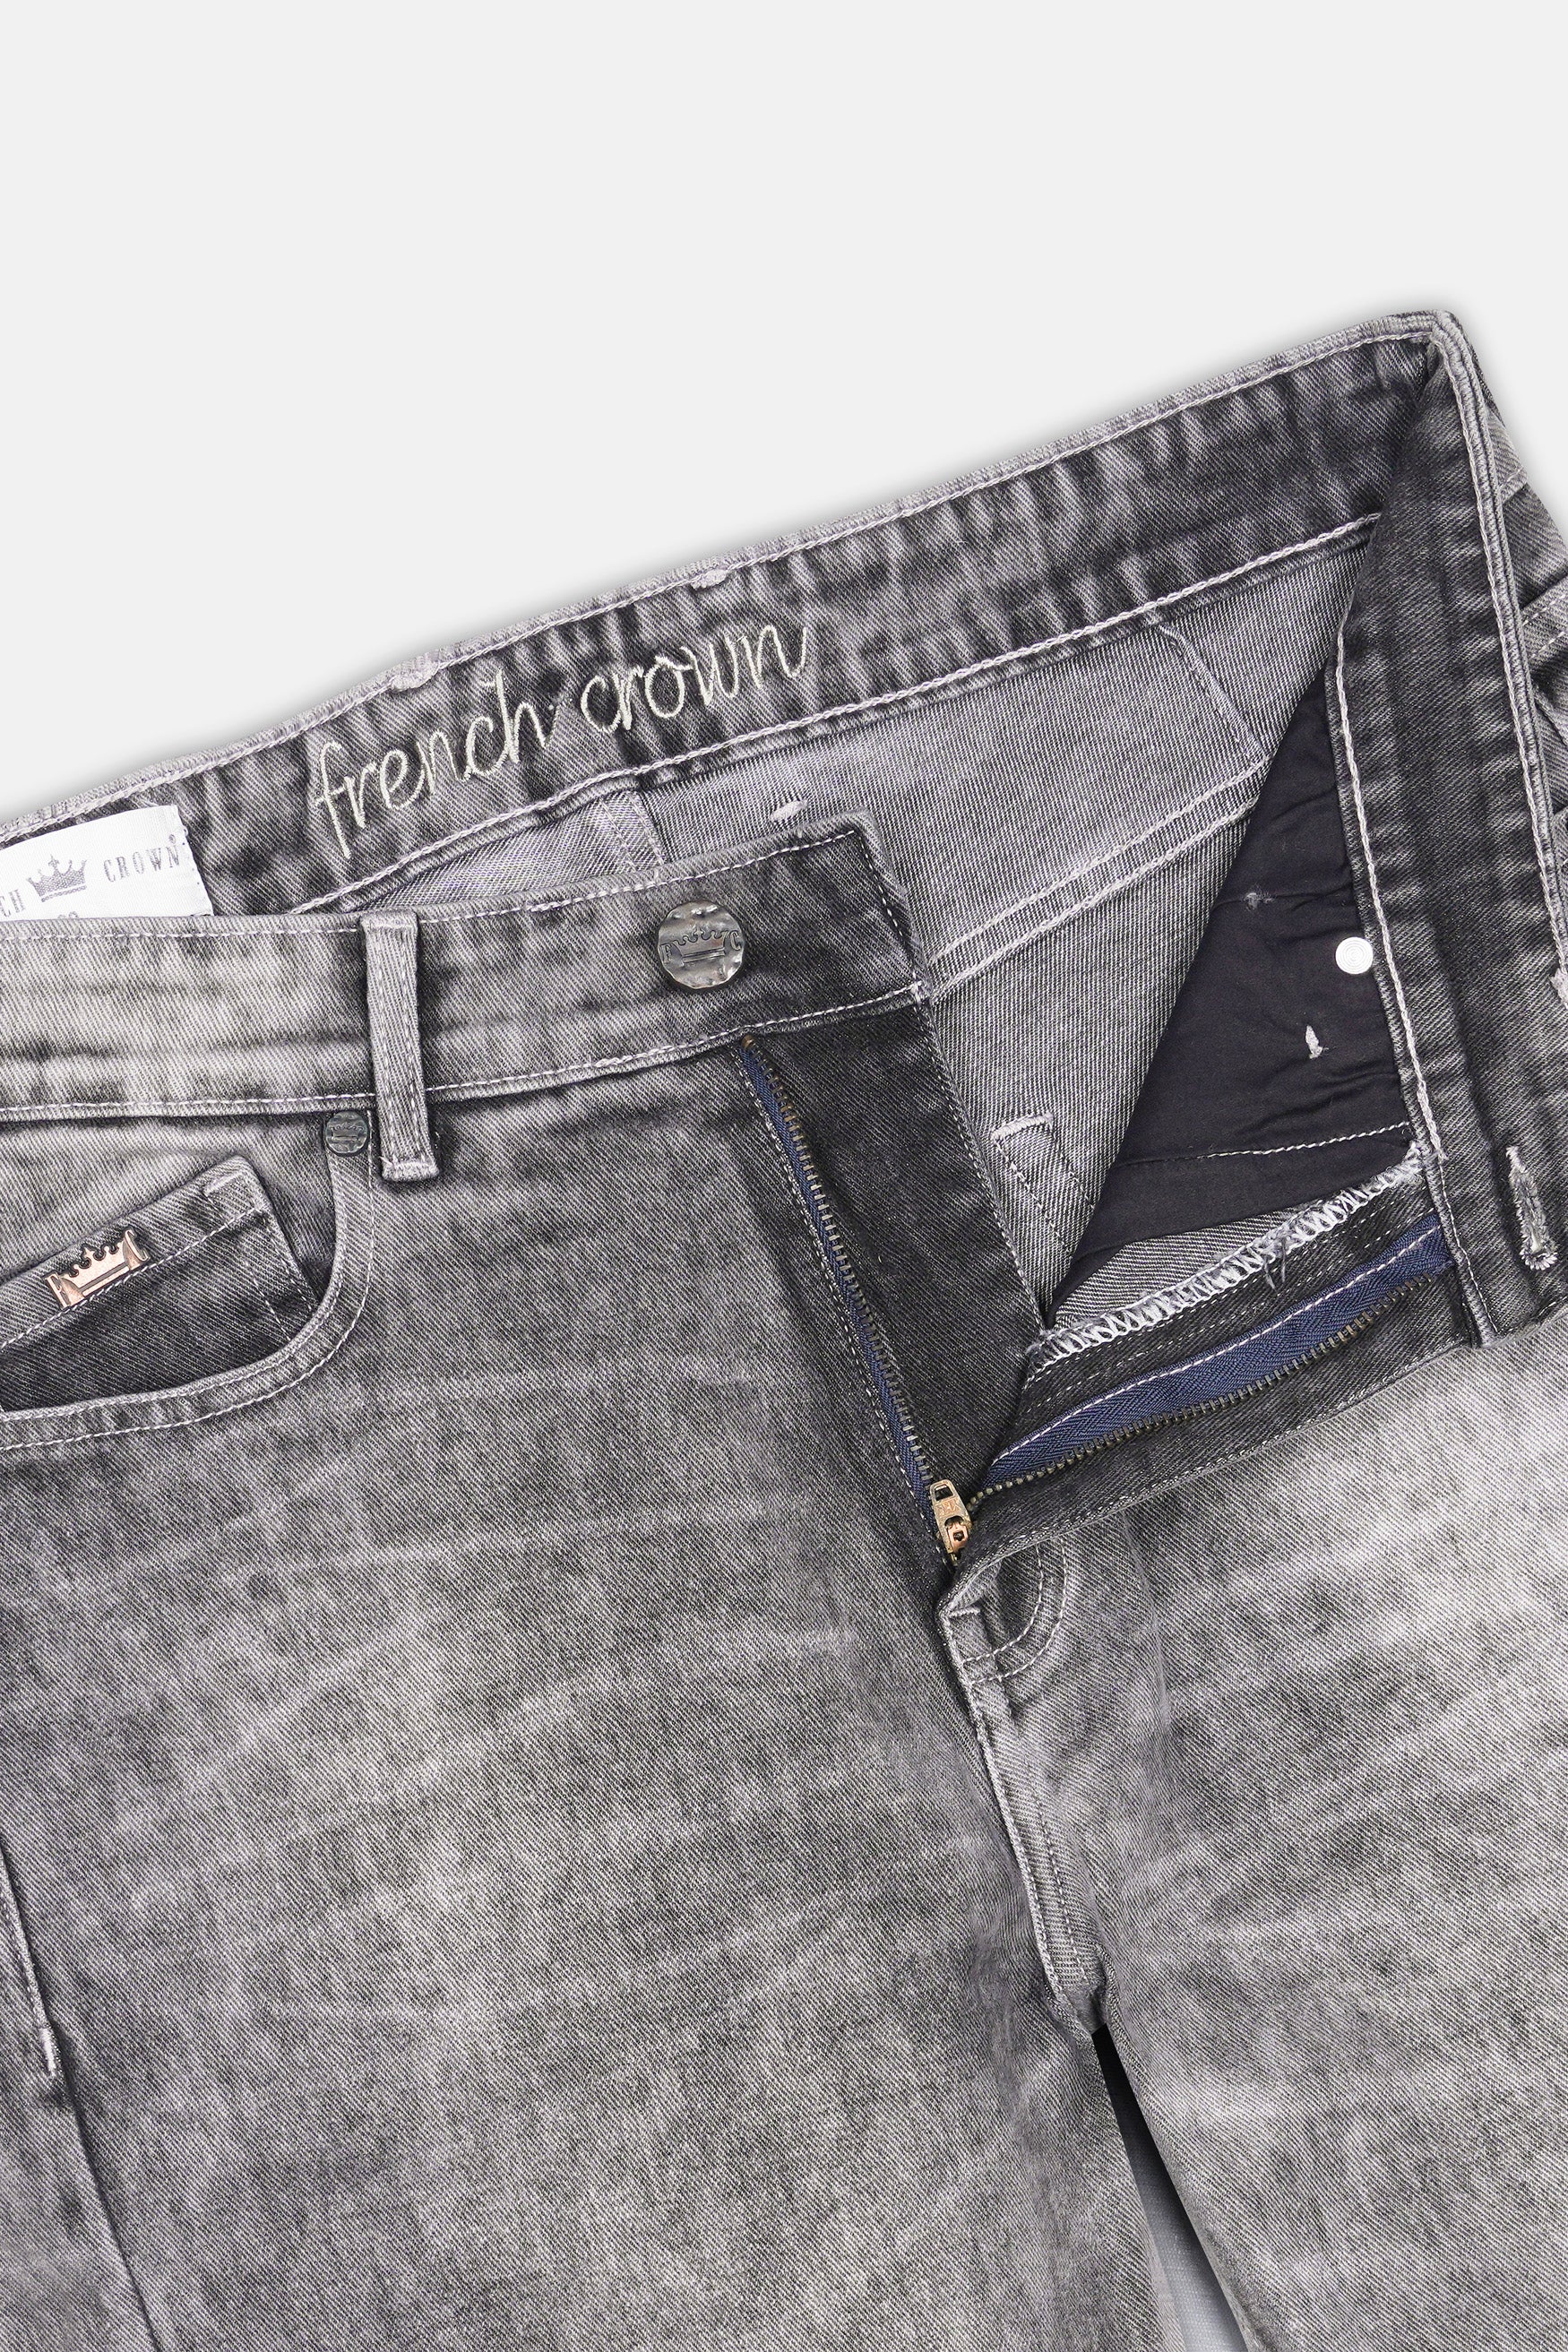 Concord Gray Washed Denim